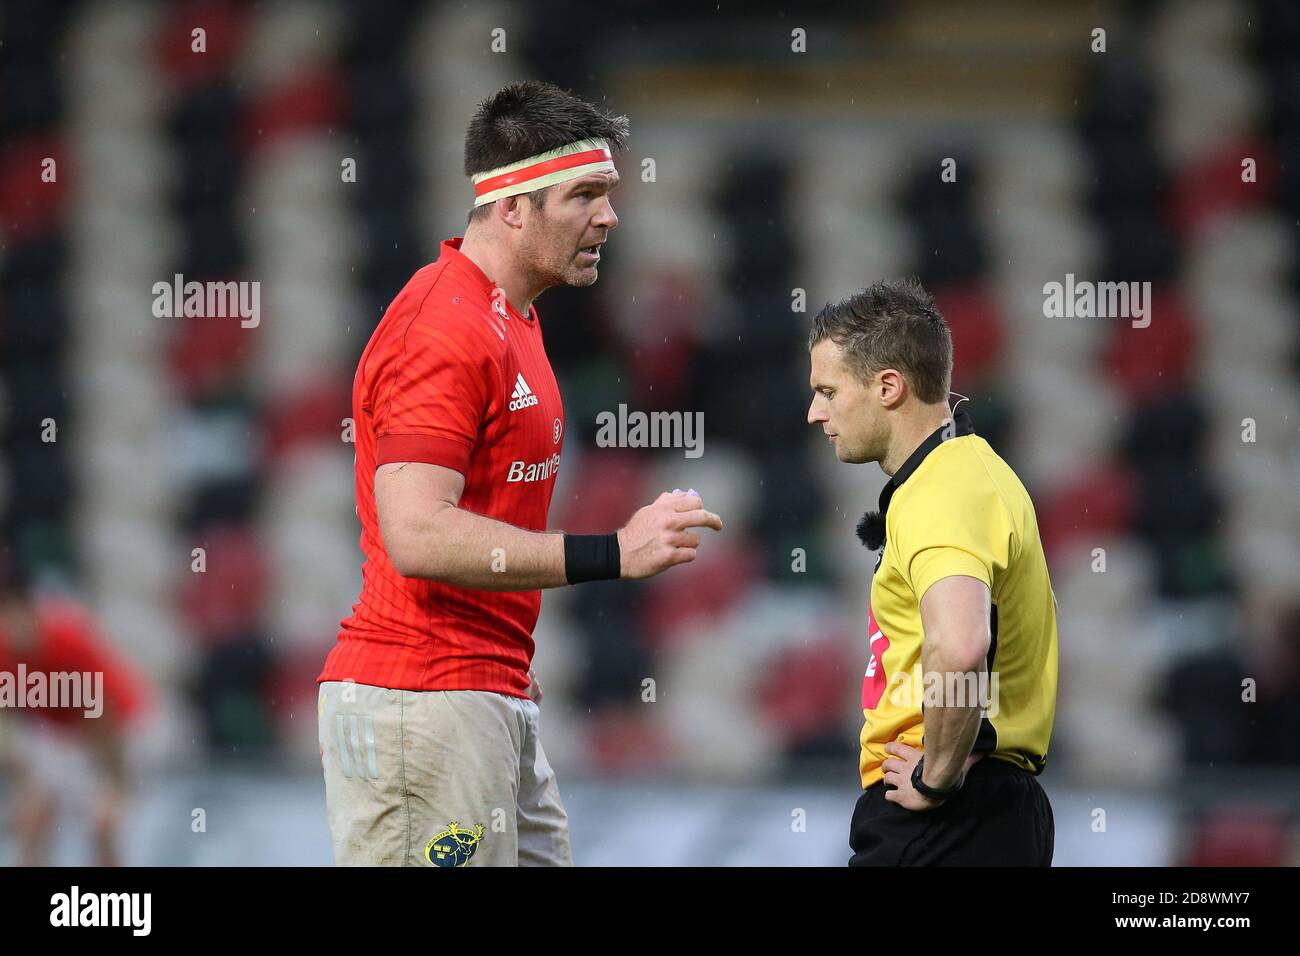 Newport, Großbritannien. November 2020. Billy Holland aus Münster (l) chattet mit Schiedsrichter Ben Blain . Guinness Pro14 Rugby, Dragons V Munster Rugby bei Rodney Parade in Newport on Sunday 1st November 2020. PIC by Andrew Orchard/Andrew Orchard Sports Photography/Alamy Live News Credit: Andrew Orchard Sports Photography/Alamy Live News Stockfoto